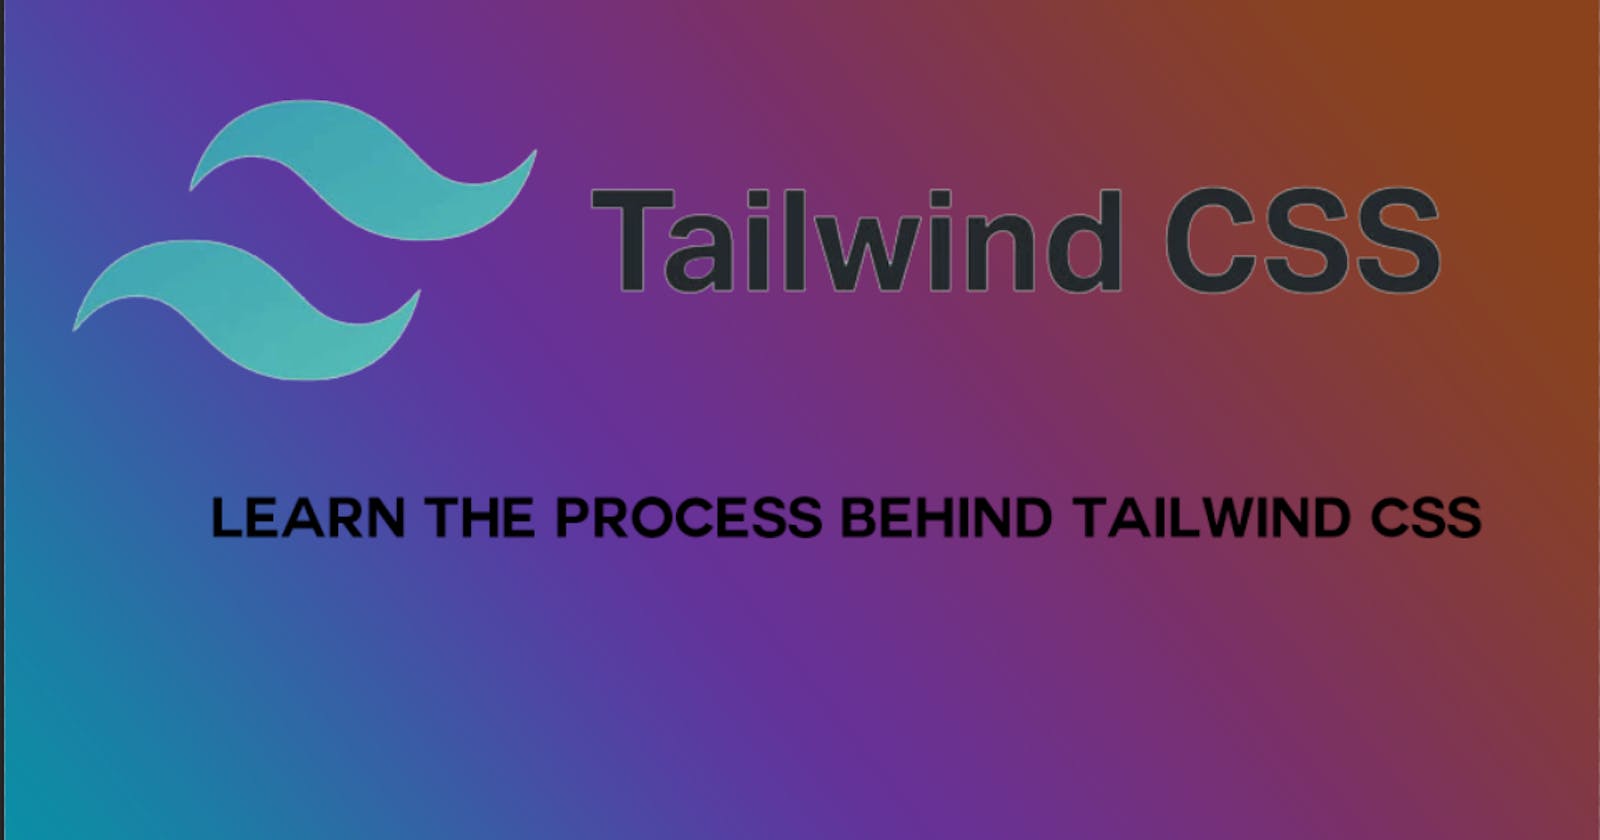 Tailwind CSS explained! Learn the process behind this amazing framework!